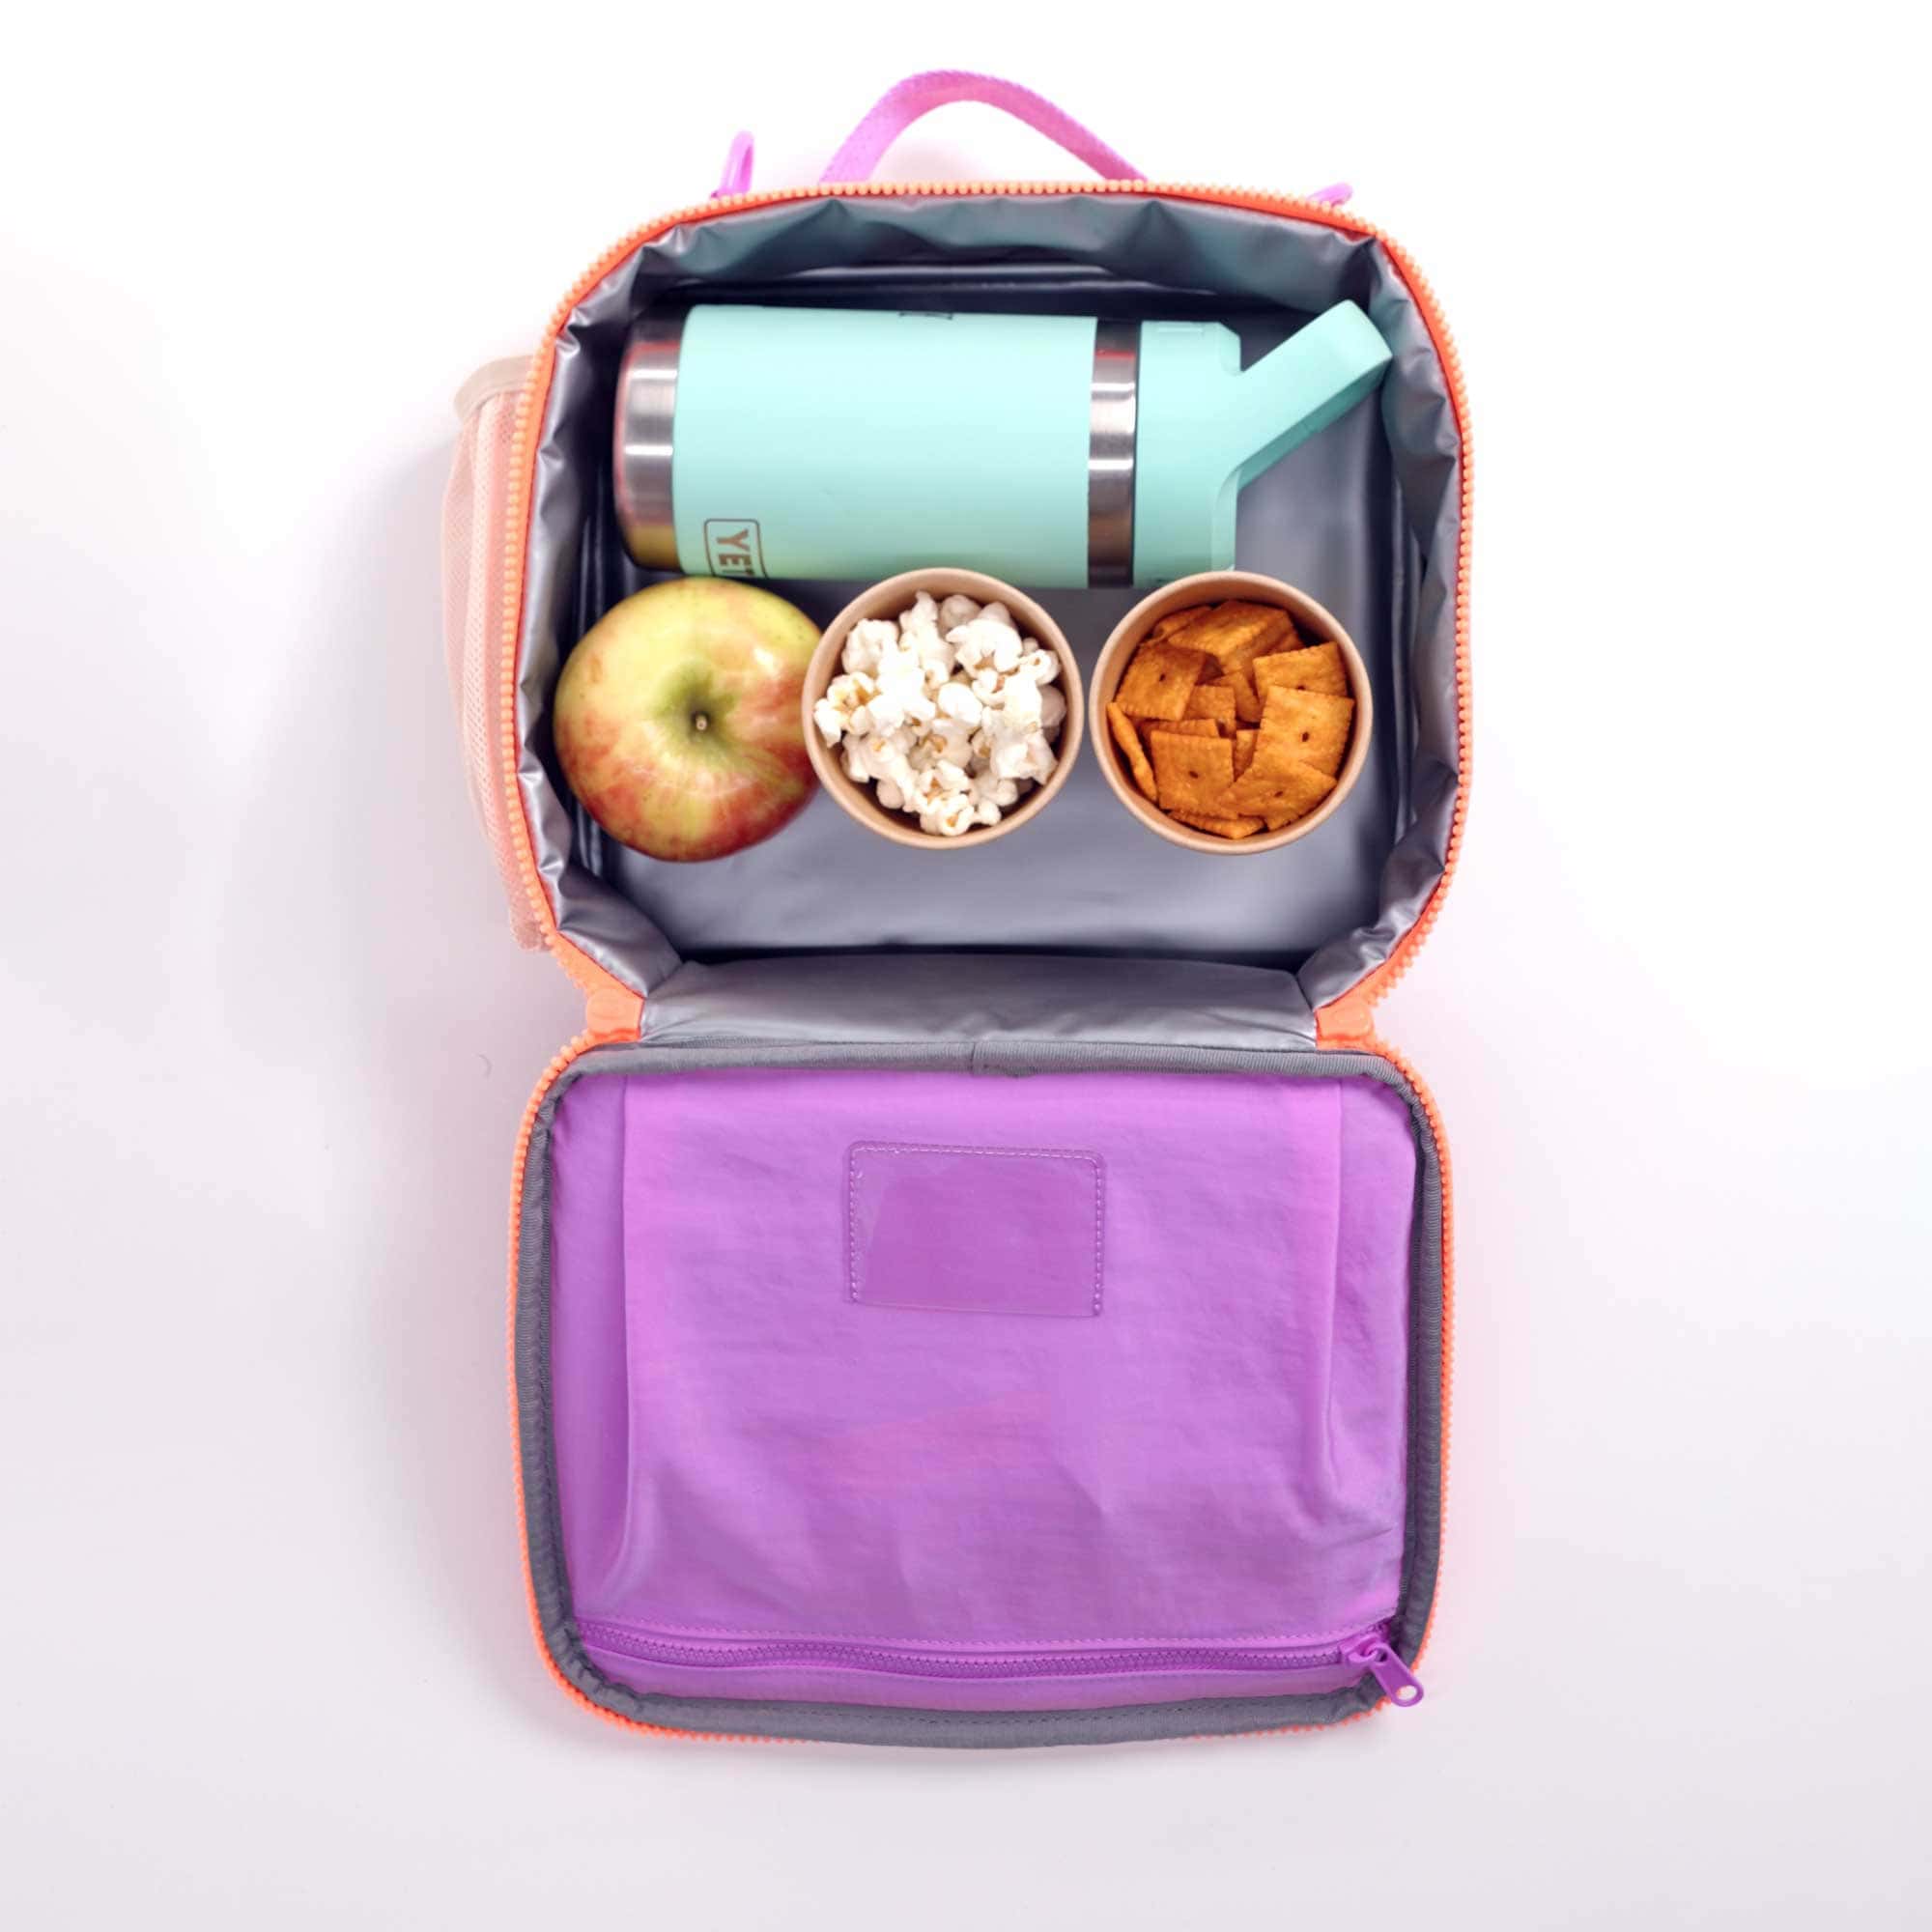 BÉIS 'The Kids Lunch Box' in Beige - Best Lunchboxes For Kids In Beige